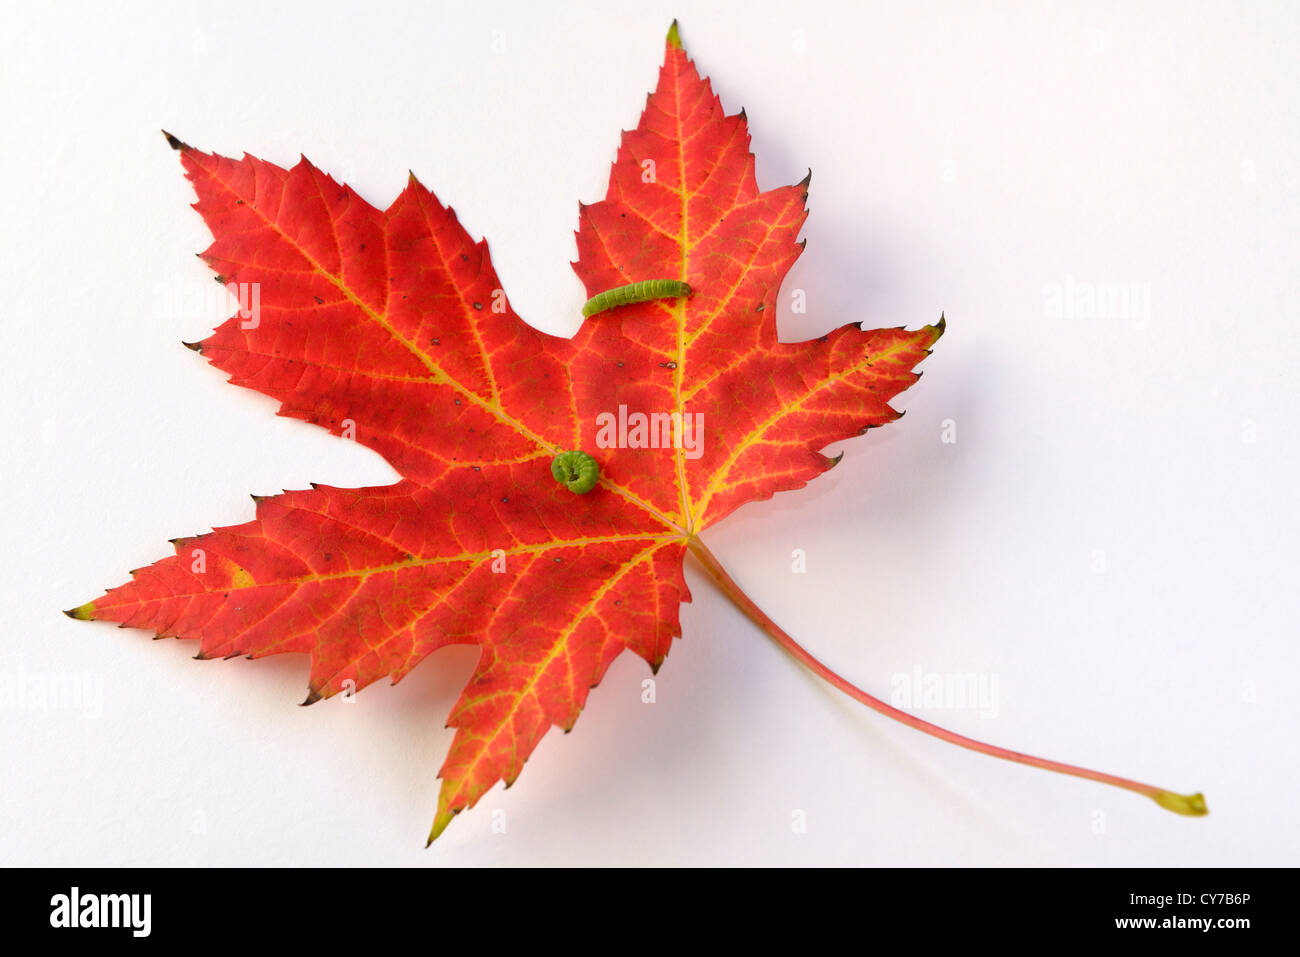 Green caterpillars on a Red Maple leaf with yellow veins on white background Stock Photo